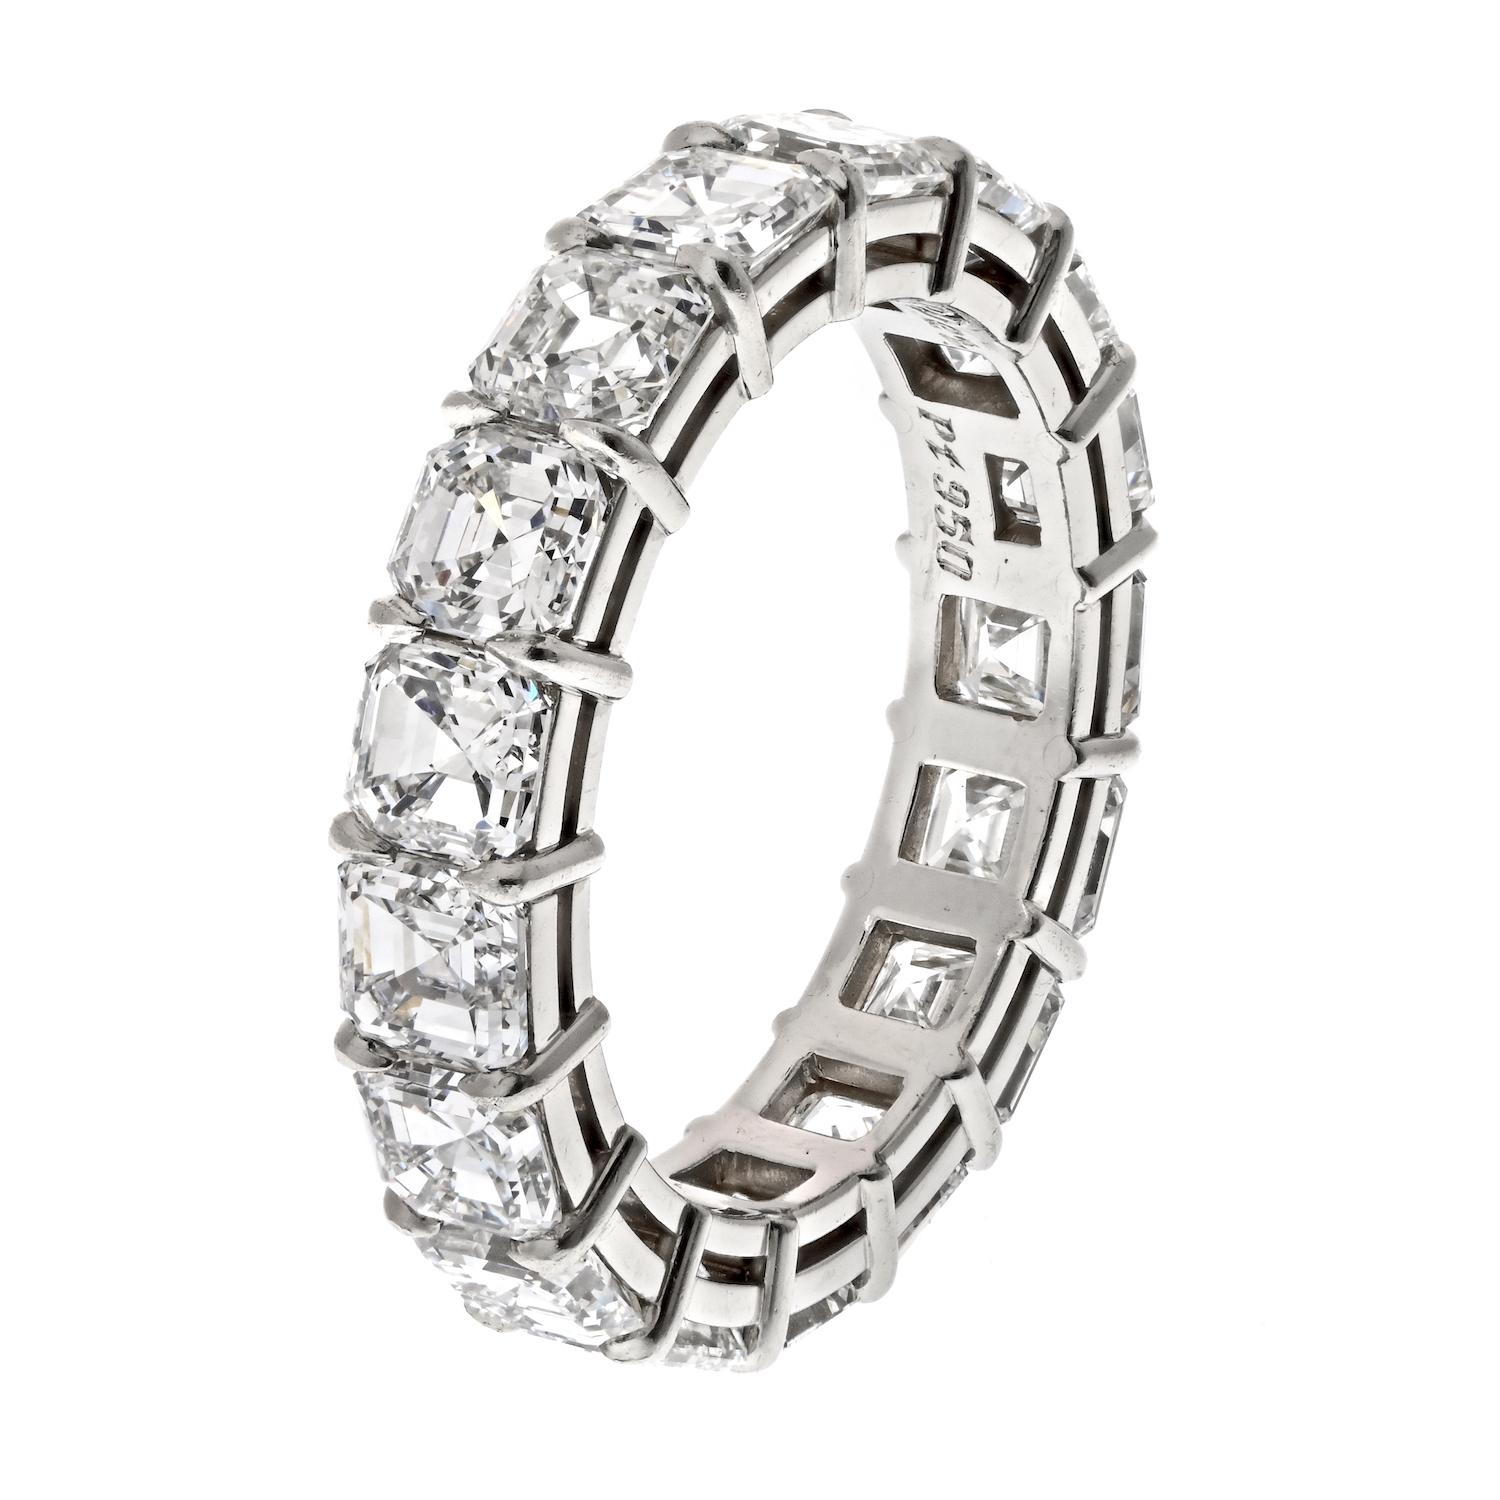 This stunning diamond eternity band is a true statement piece, crafted in platinum with Asscher cut diamonds. With a total carat weight of 7.82cttw and 17 diamonds F-G color, VS1-VS2 clarity, this ring exudes luxury and elegance. The diamonds are